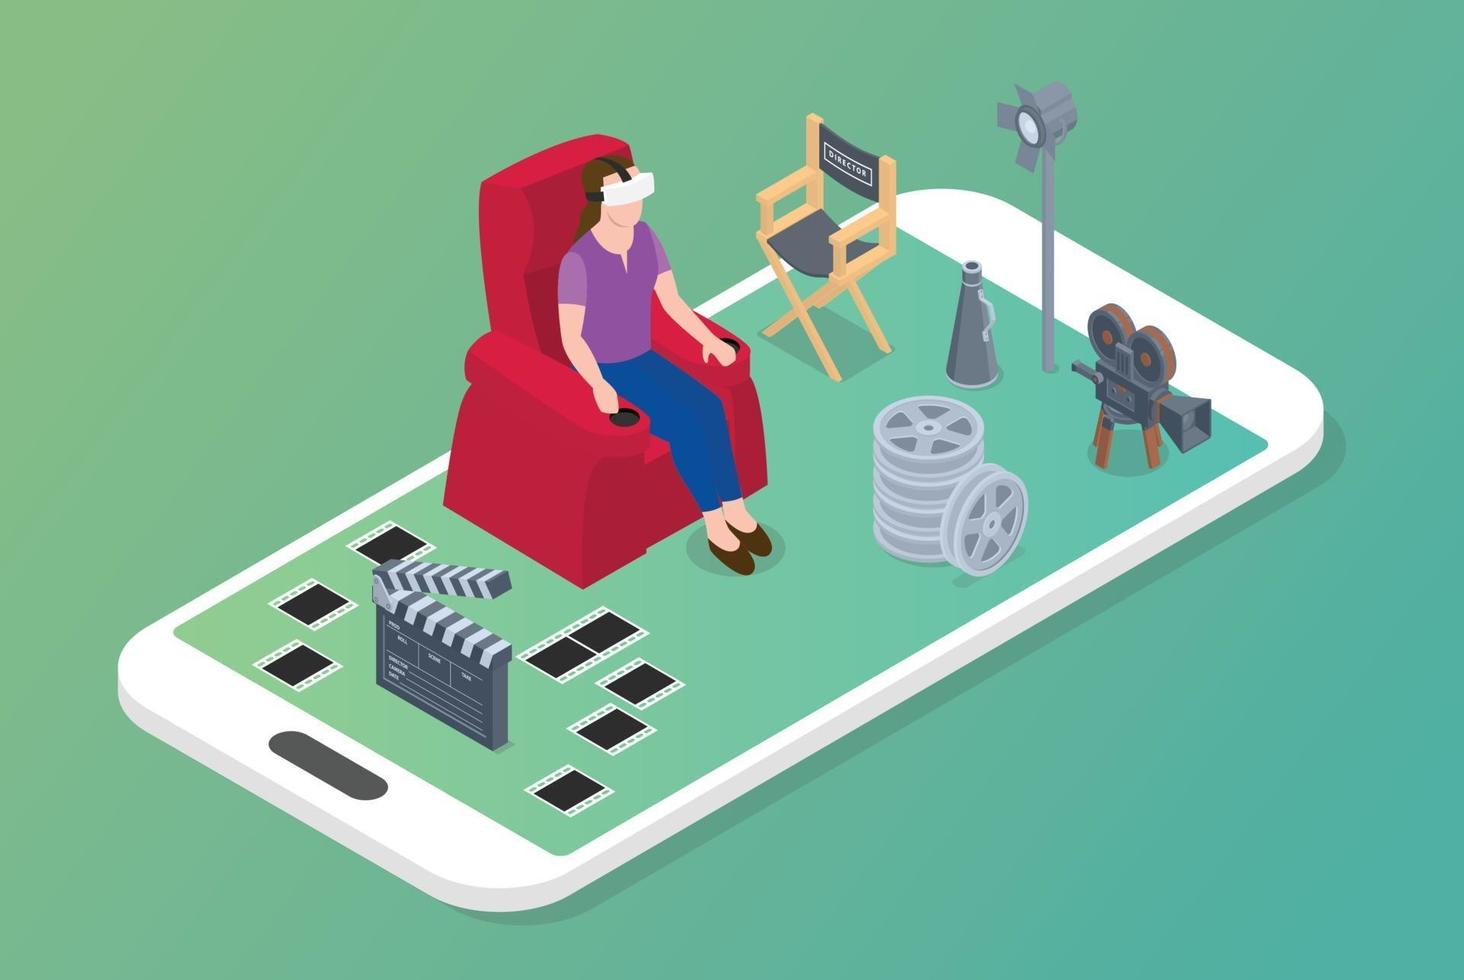 vr virtual reality movies concept with woman sit on chair vector